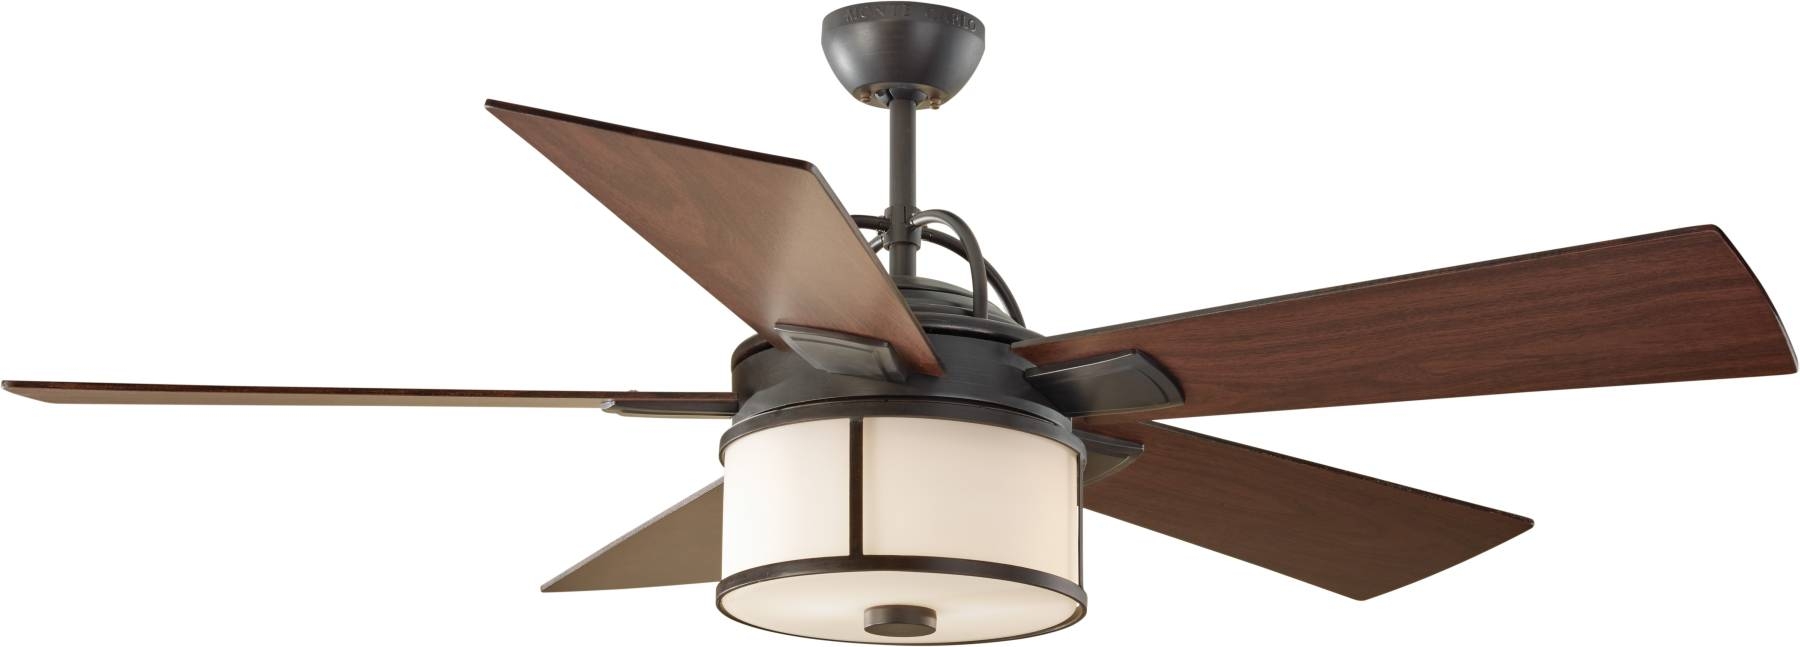 Permalink to Dark Wood Ceiling Fan With Light